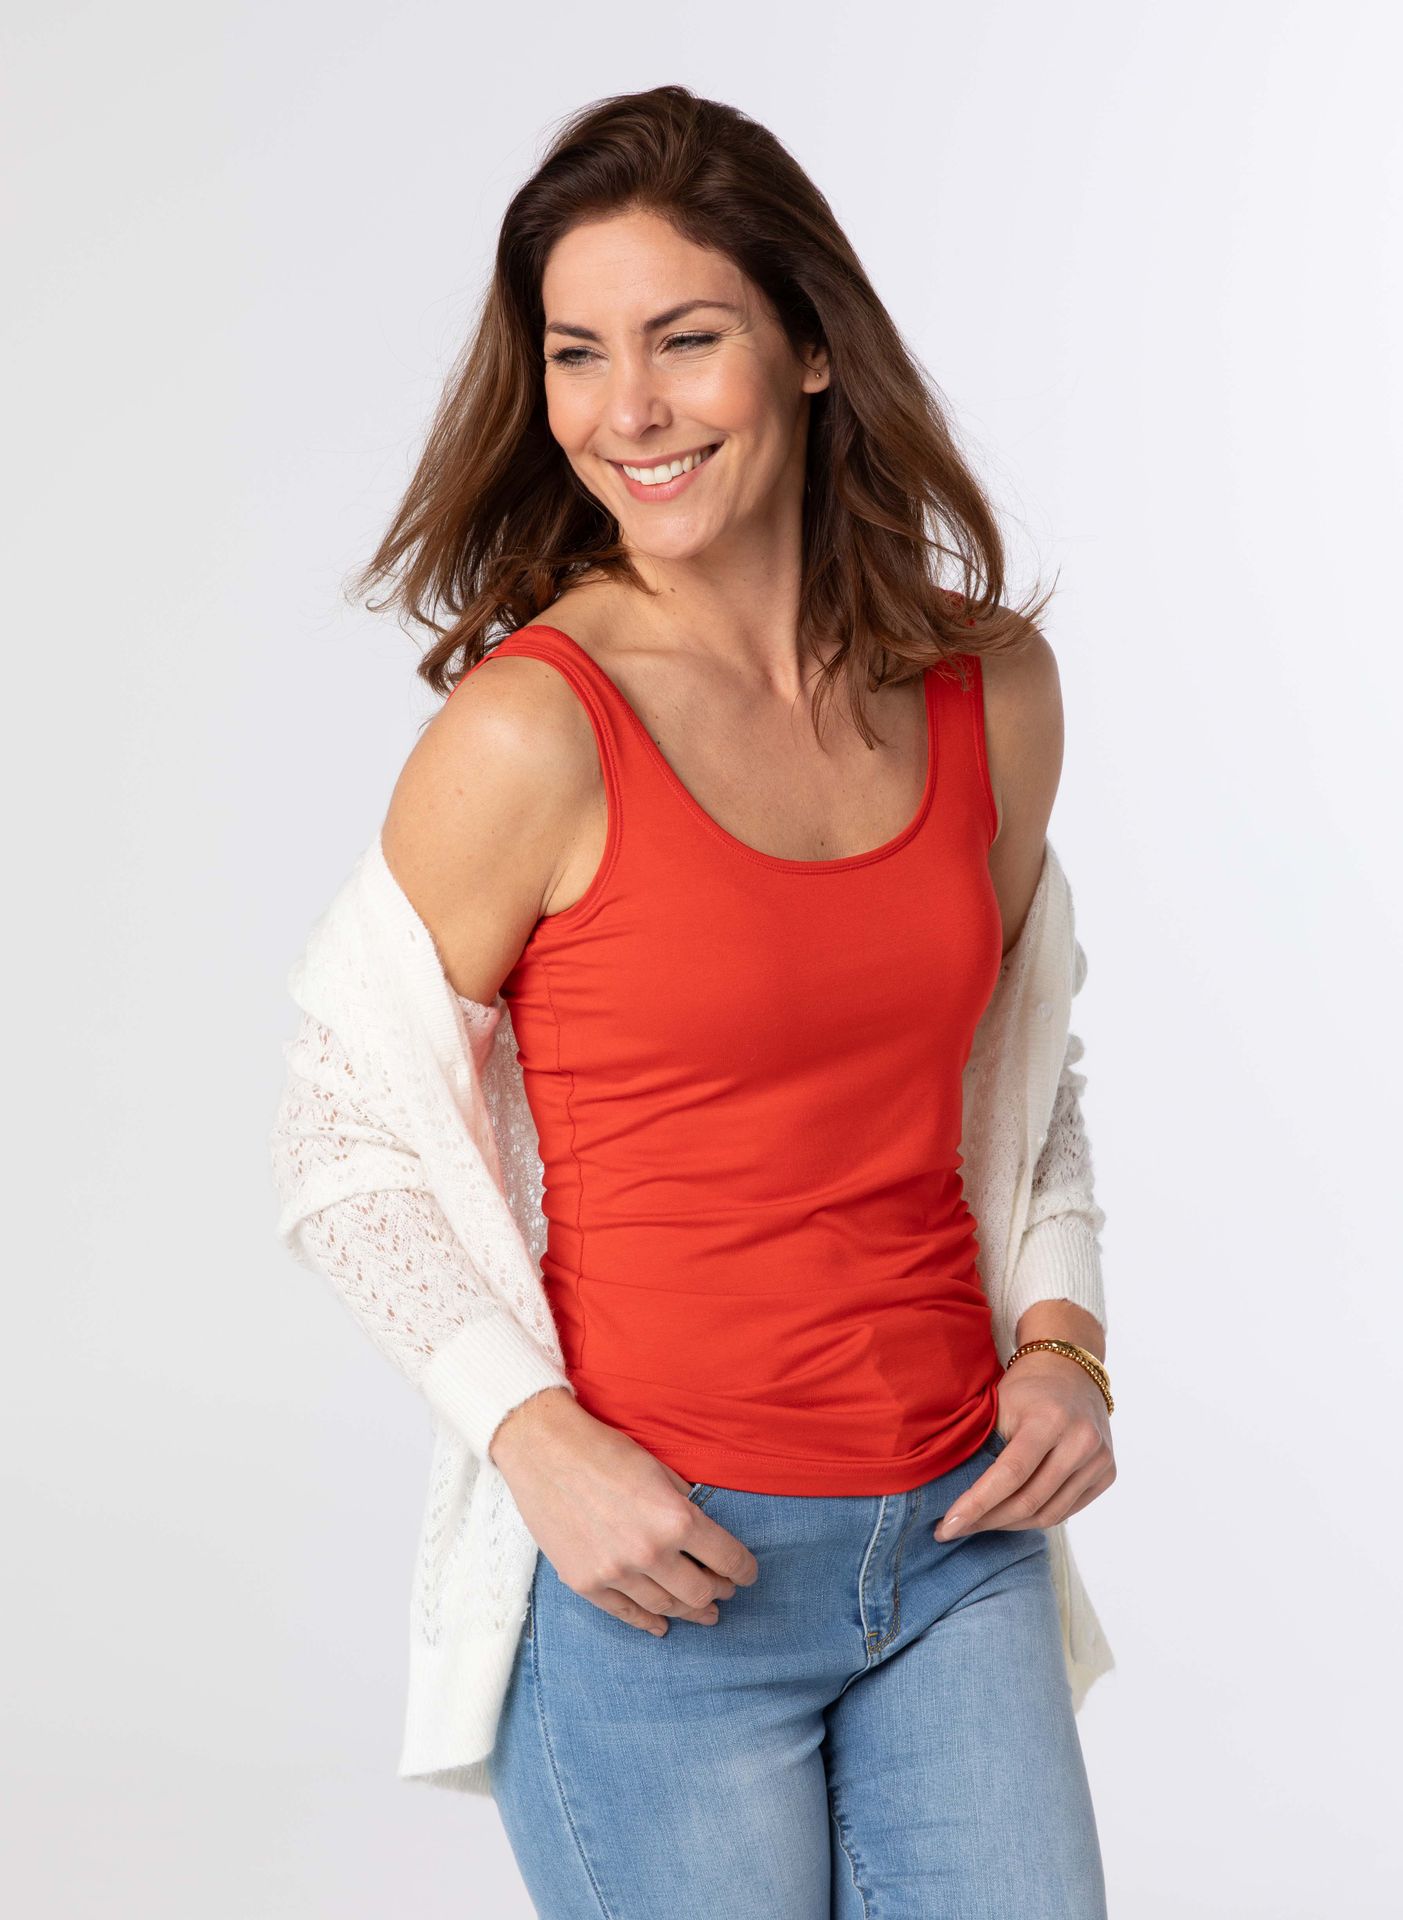 Norah Top Marianne rood tomato 212247-668